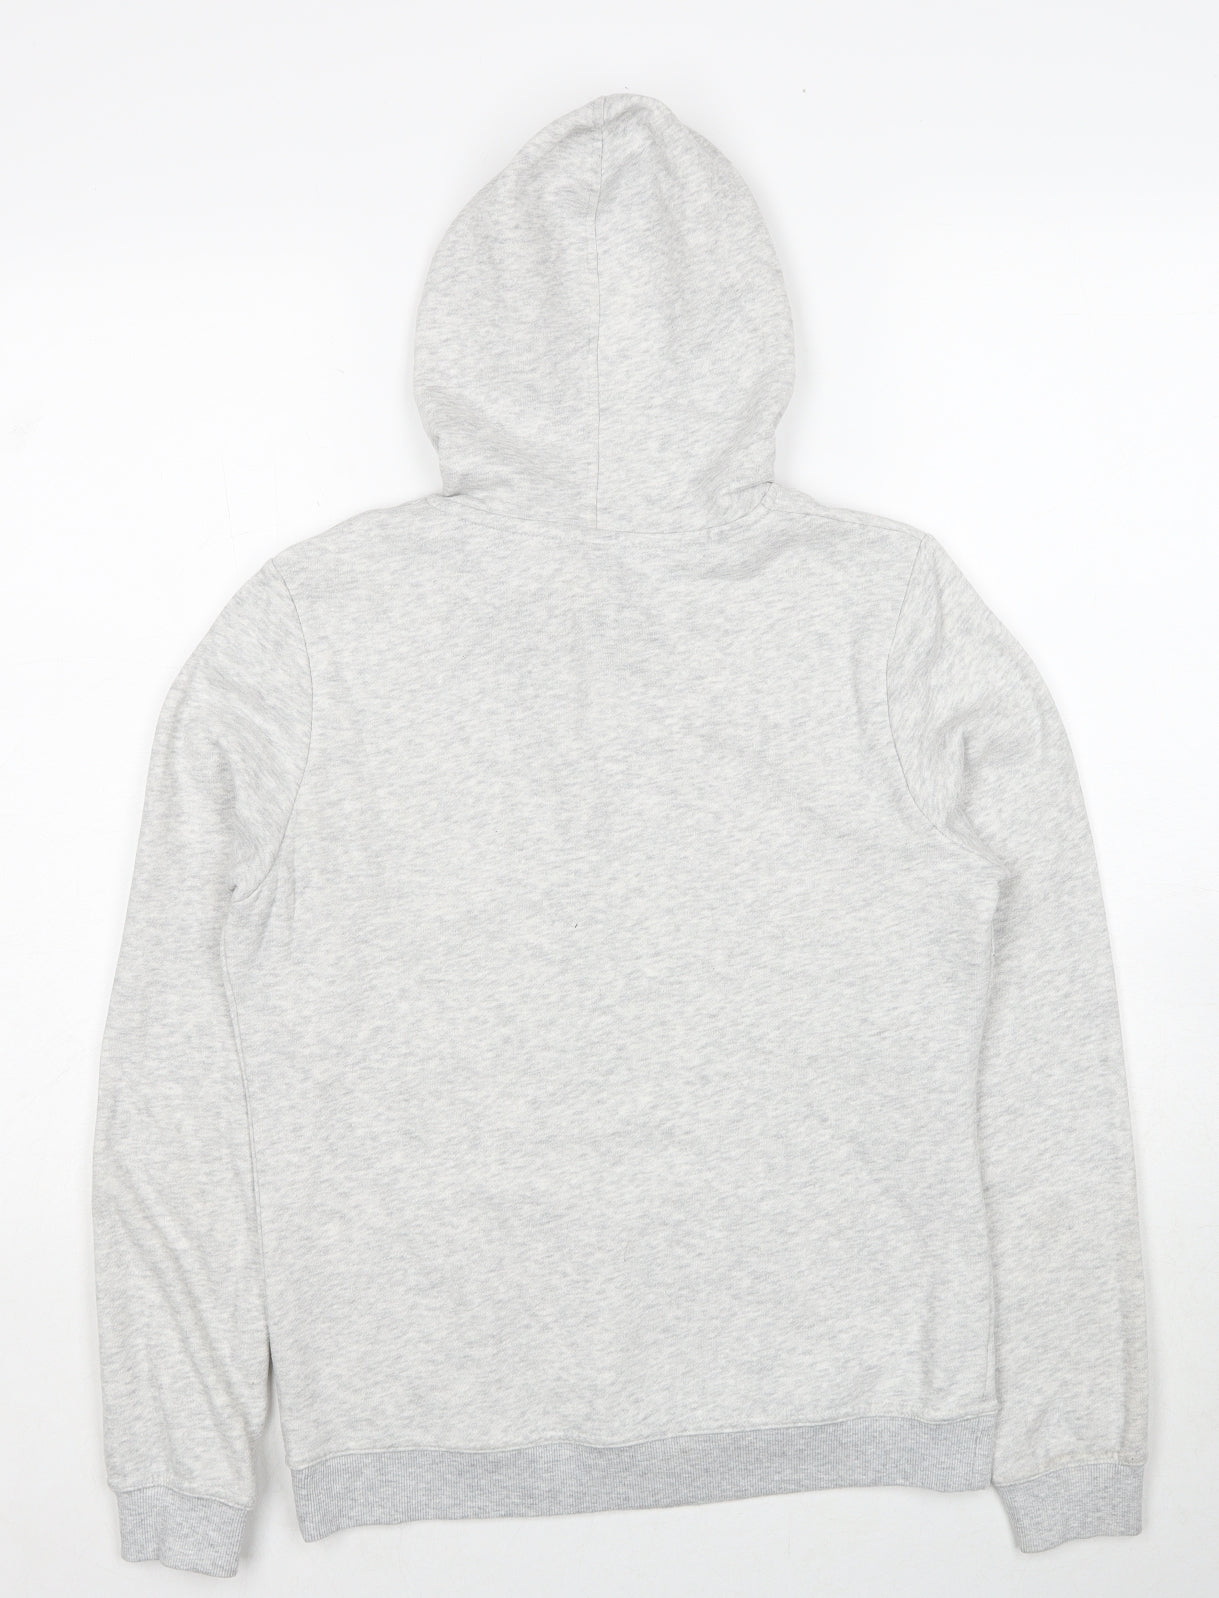 DECATHLON Womens Grey Cotton Pullover Hoodie Size M Pullover